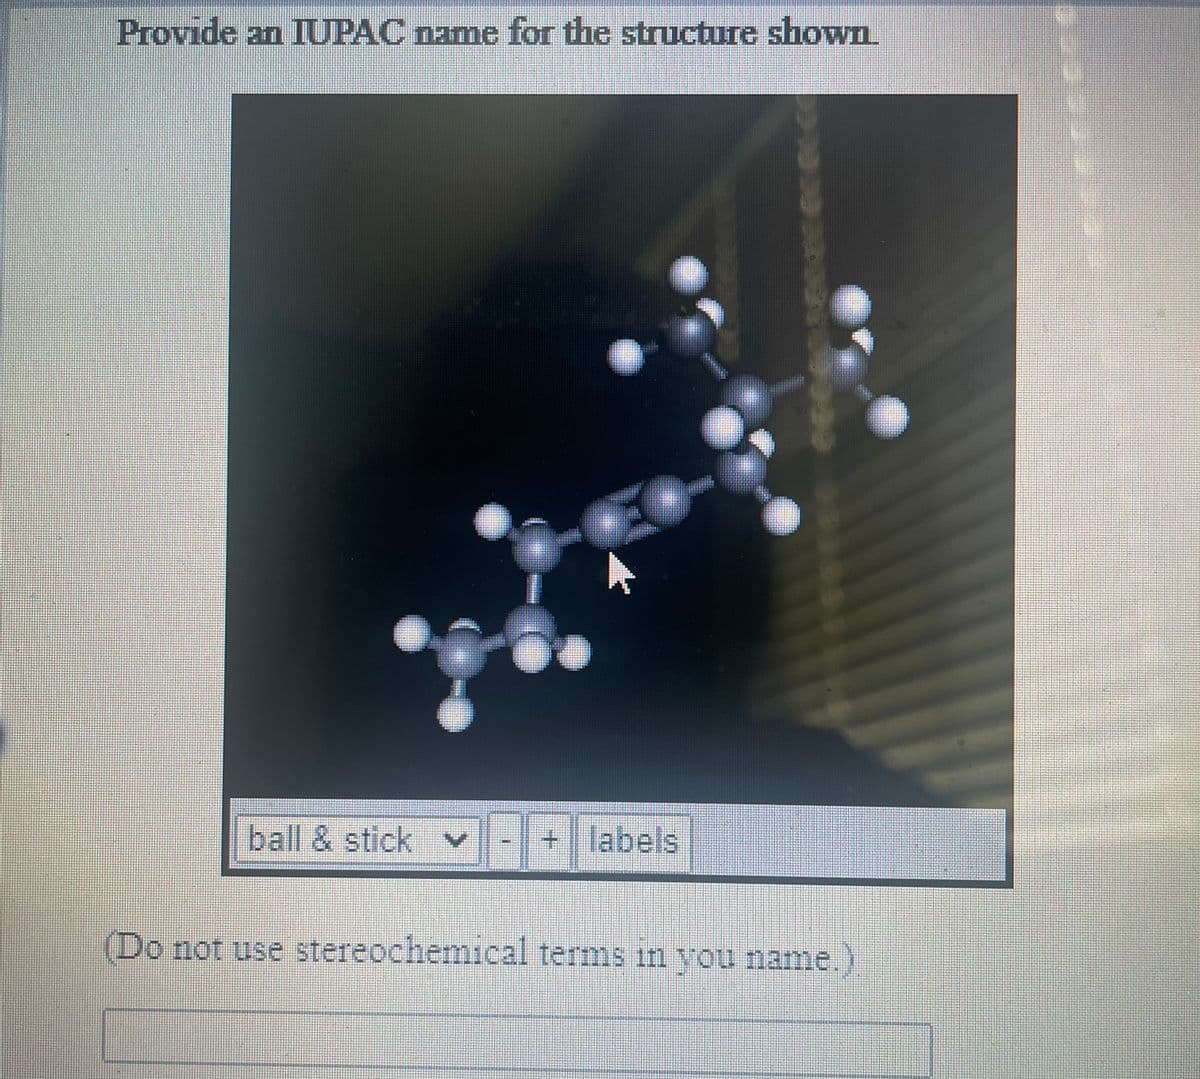 Provide an IUPAC name for the structure shown
ball & stick v
+labels
(Do not use stereochemical terms in vou name.
